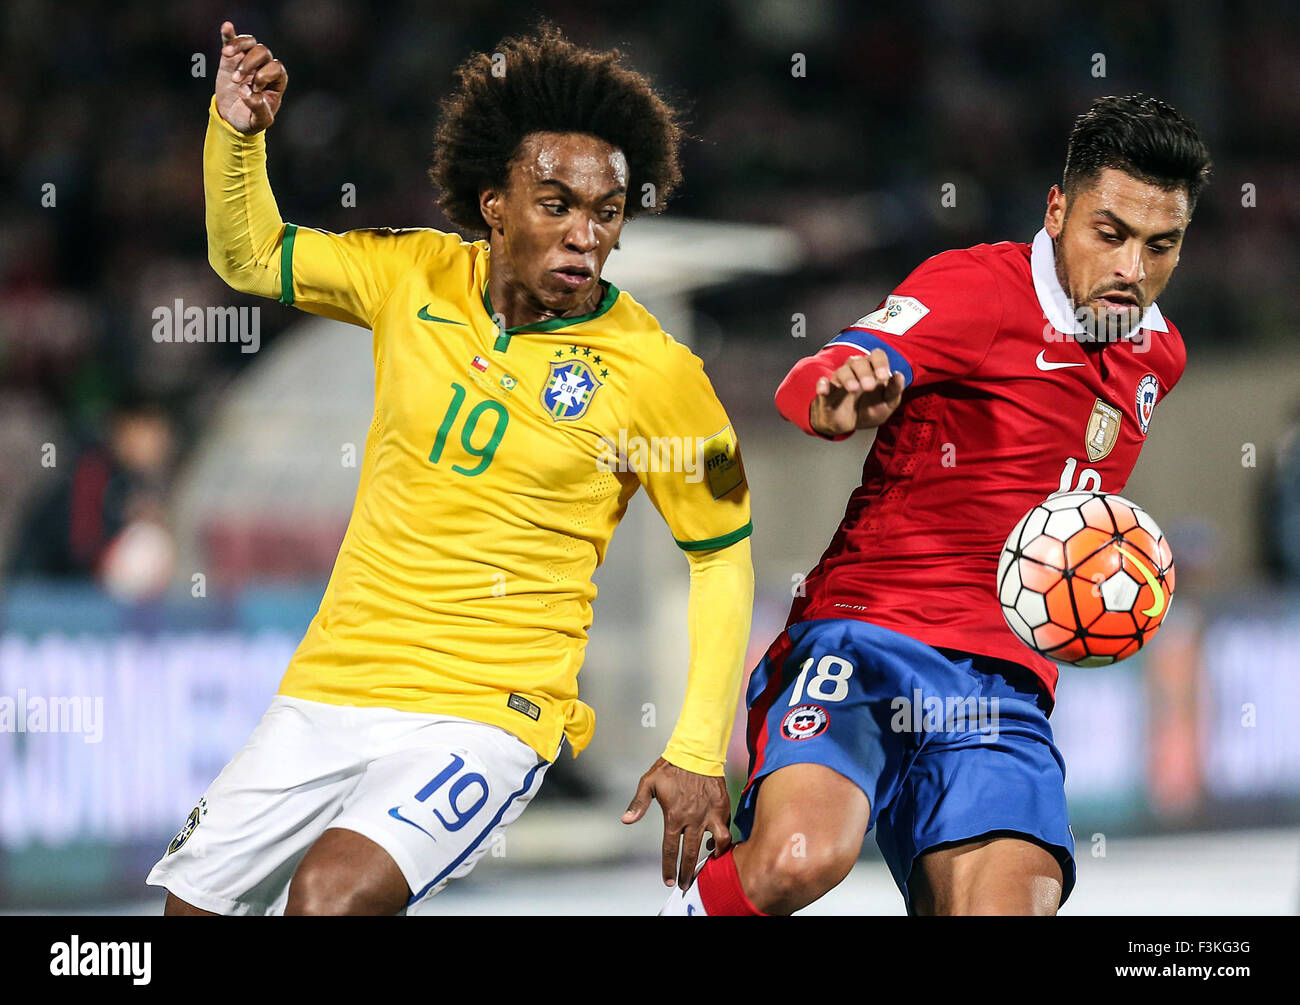 Santiago, Chile. 8th Oct, 2015. Chile's Gonzalo Jara (R) vies with Brazil's Willian Borges da Silva during the qualifying match for the World Cup Russia 2018 at the National Stadium in Santiago, Chile, on Oct. 8, 2015. Chile won 2-0. Credit:  ANFP/Xinhua/Alamy Live News Stock Photo